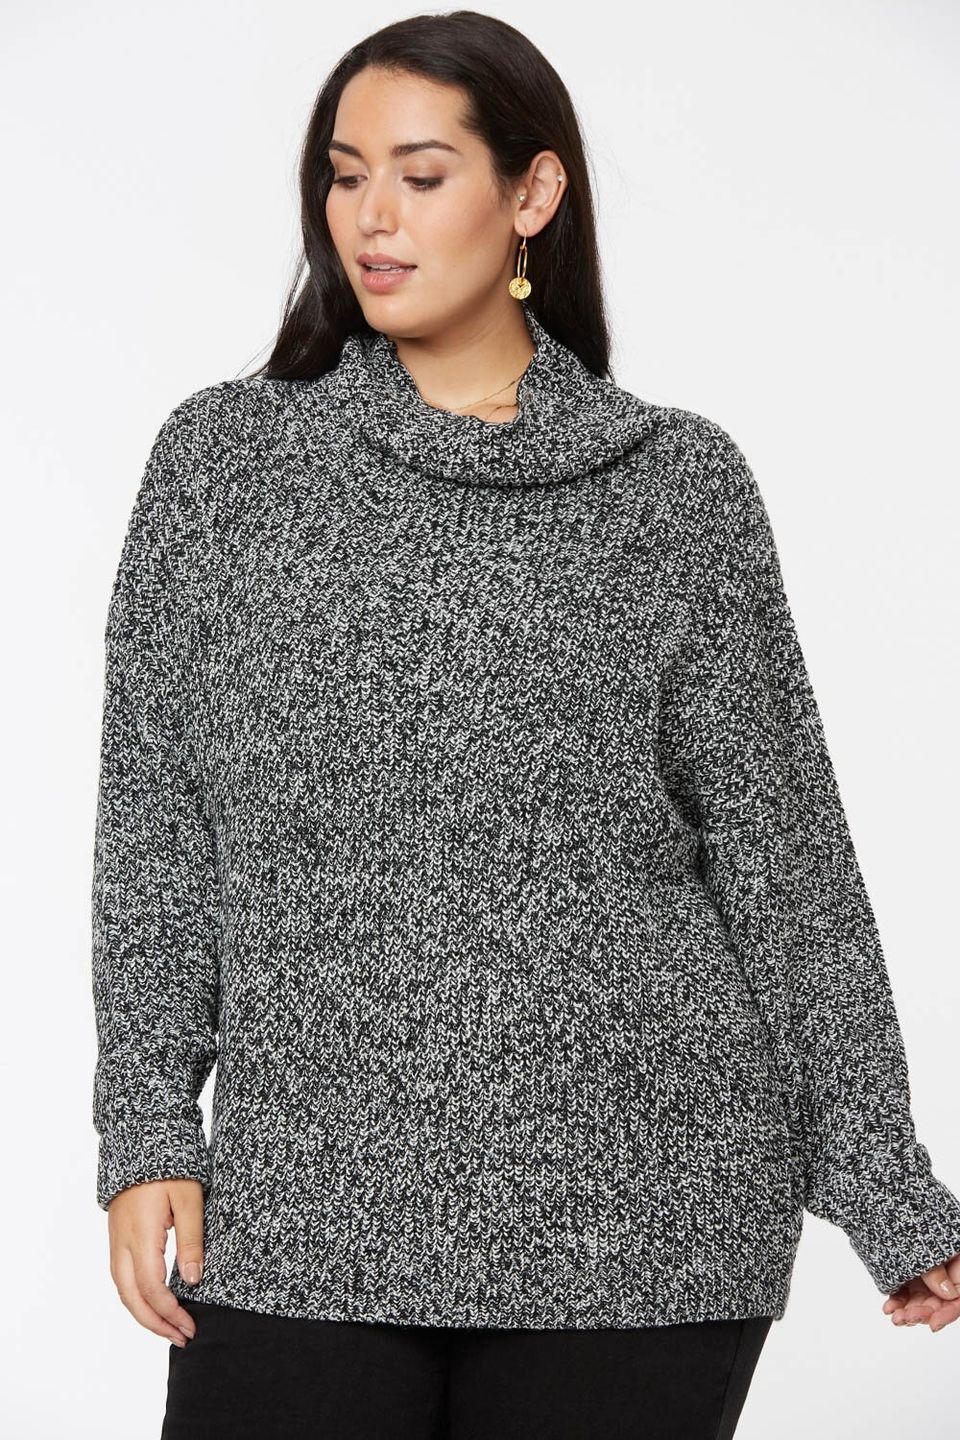 Shop The Trend: The Coziest Sweaters For Fall | HuffPost Life